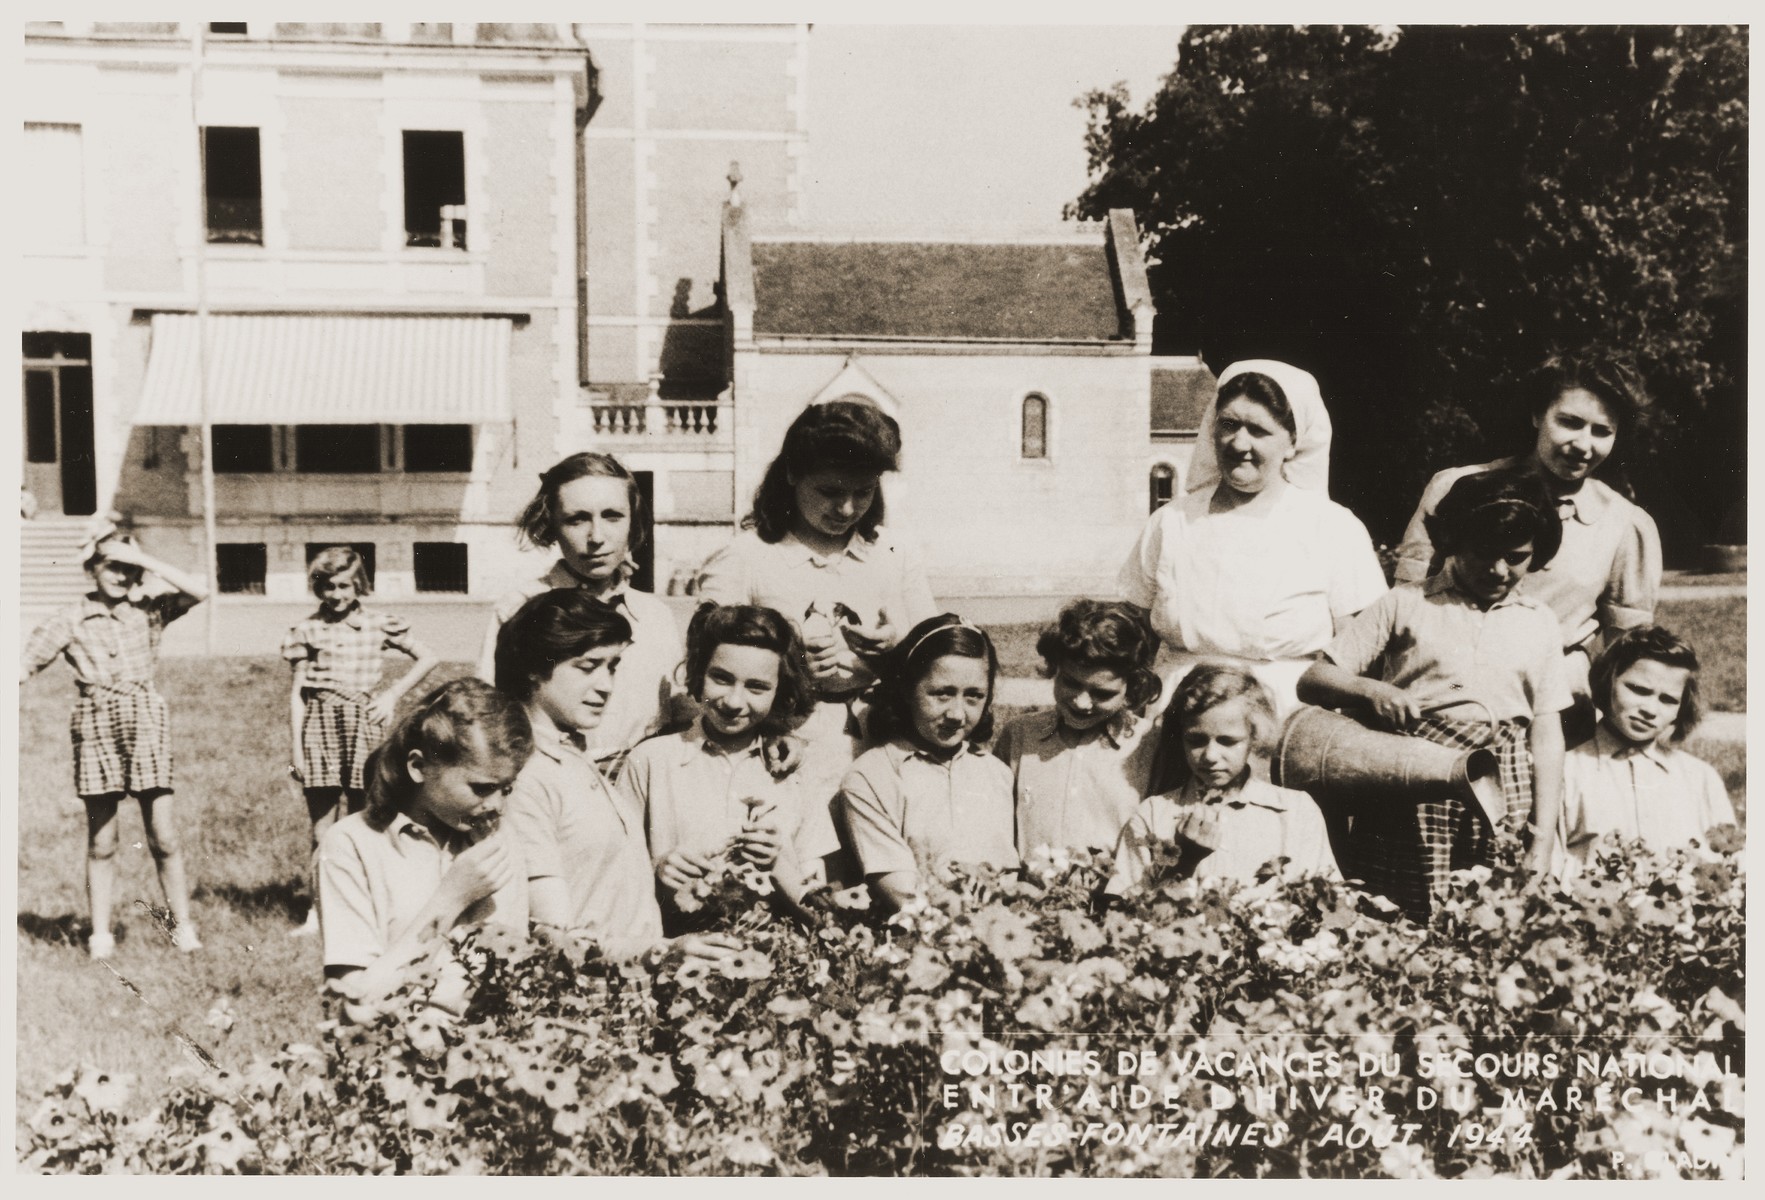 Group portrait of girls in the garden of the Les Basses-Fontaines children's home, where Jewish children were hidden during the war.  

Among those pictured (with their aliases) are Eva Tuchsznajder (Yvonne Drapier) and France Cohen (Colin).  The caption identifies Les Basses-Fontaines as a vacation home sponsored by Petain.